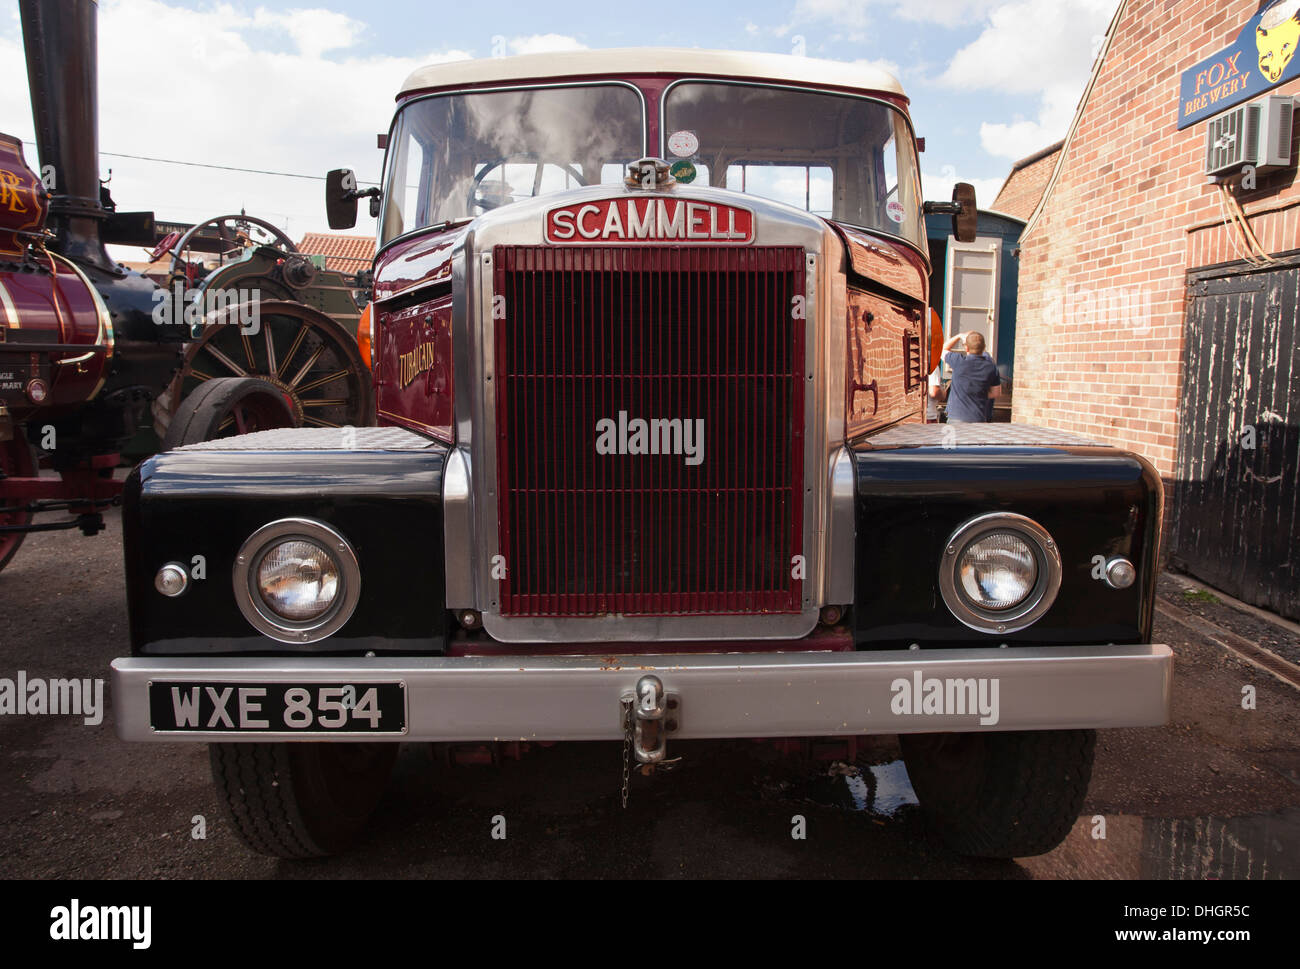 Scammell steam lorry on show at a steam rally in Heacham, England. Stock Photo